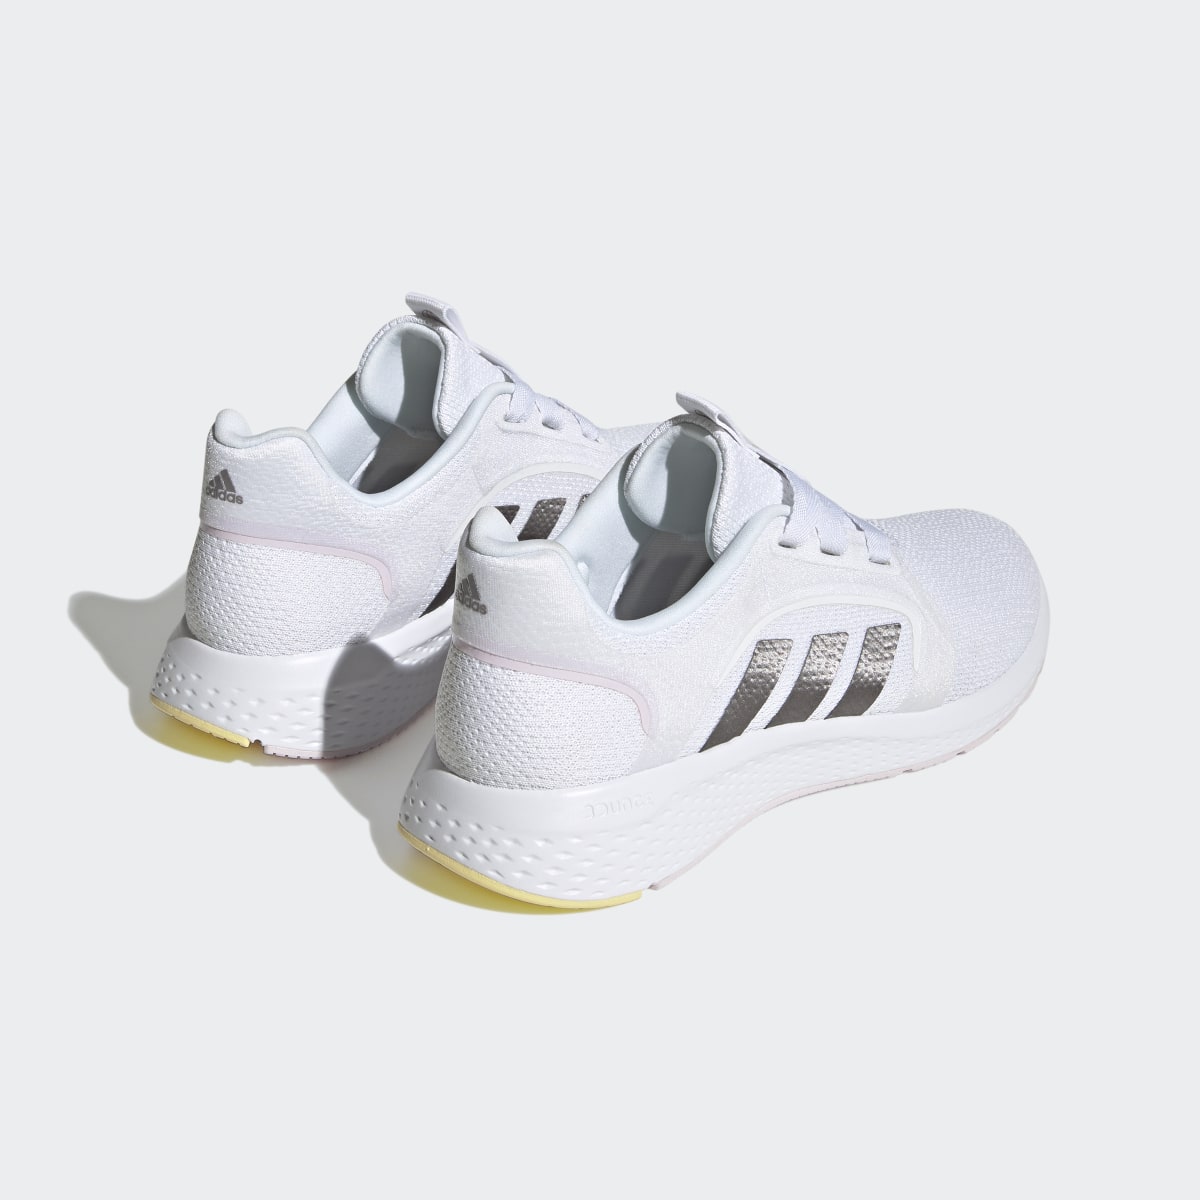 Adidas Edge Lux Shoes. 6